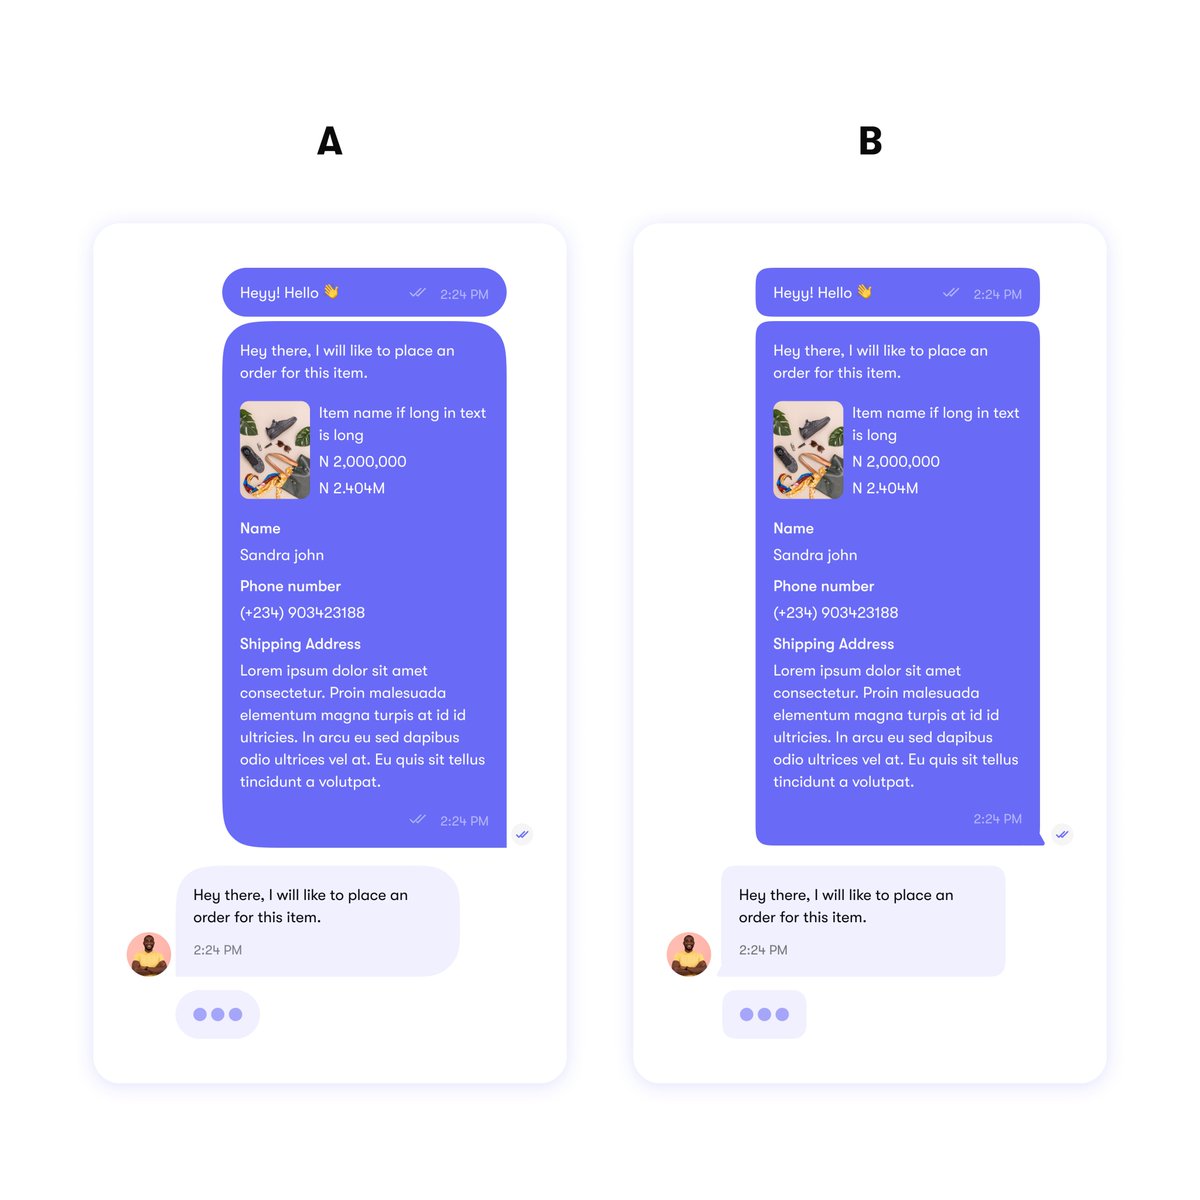 Hey people  
A or B ? which do you think is better for chat interface.?